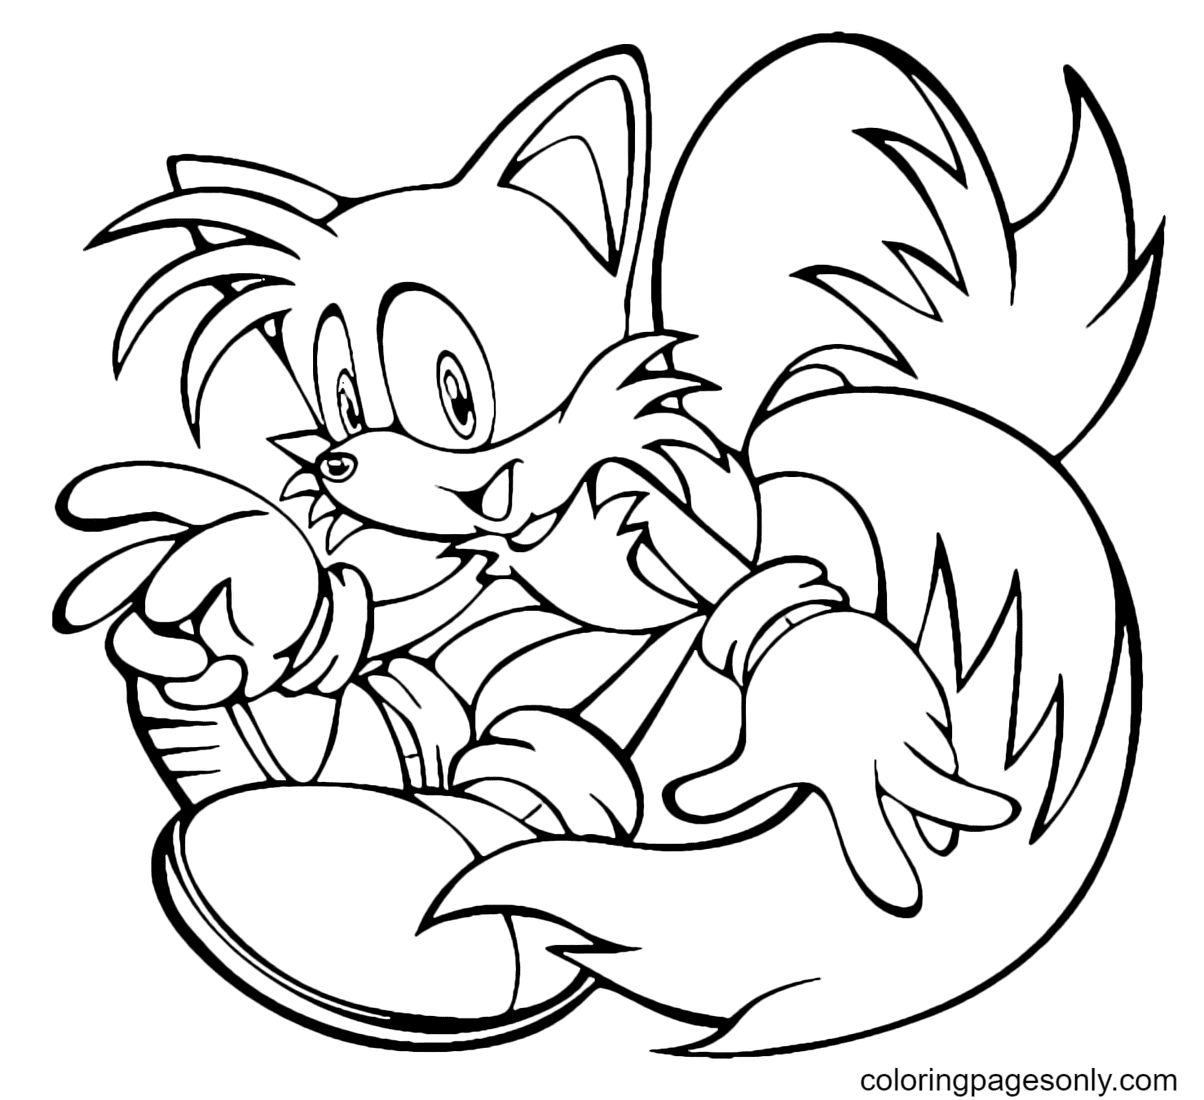 Trusted Tails Coloring Page